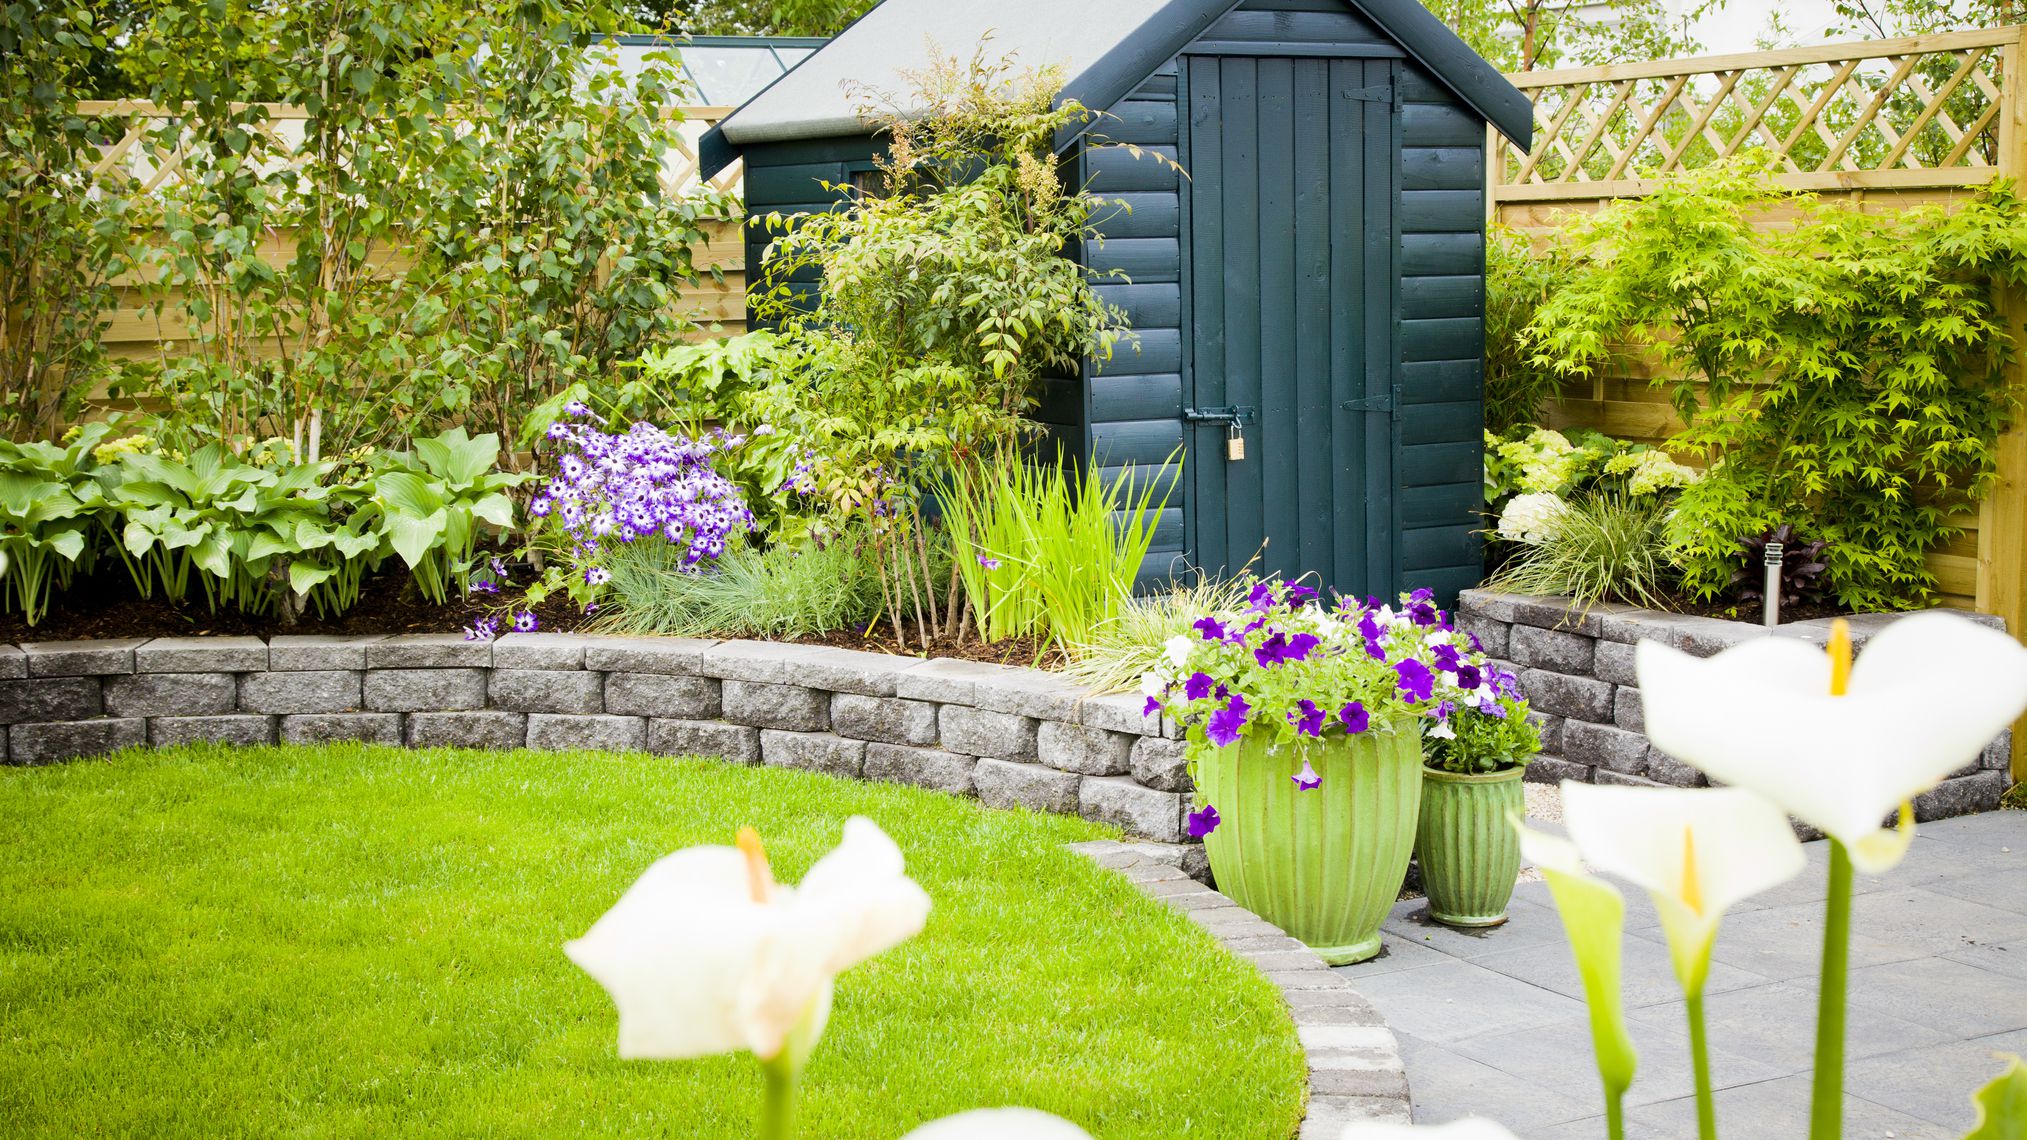 Things to Consider Before Buying Things for Your Garden Structure